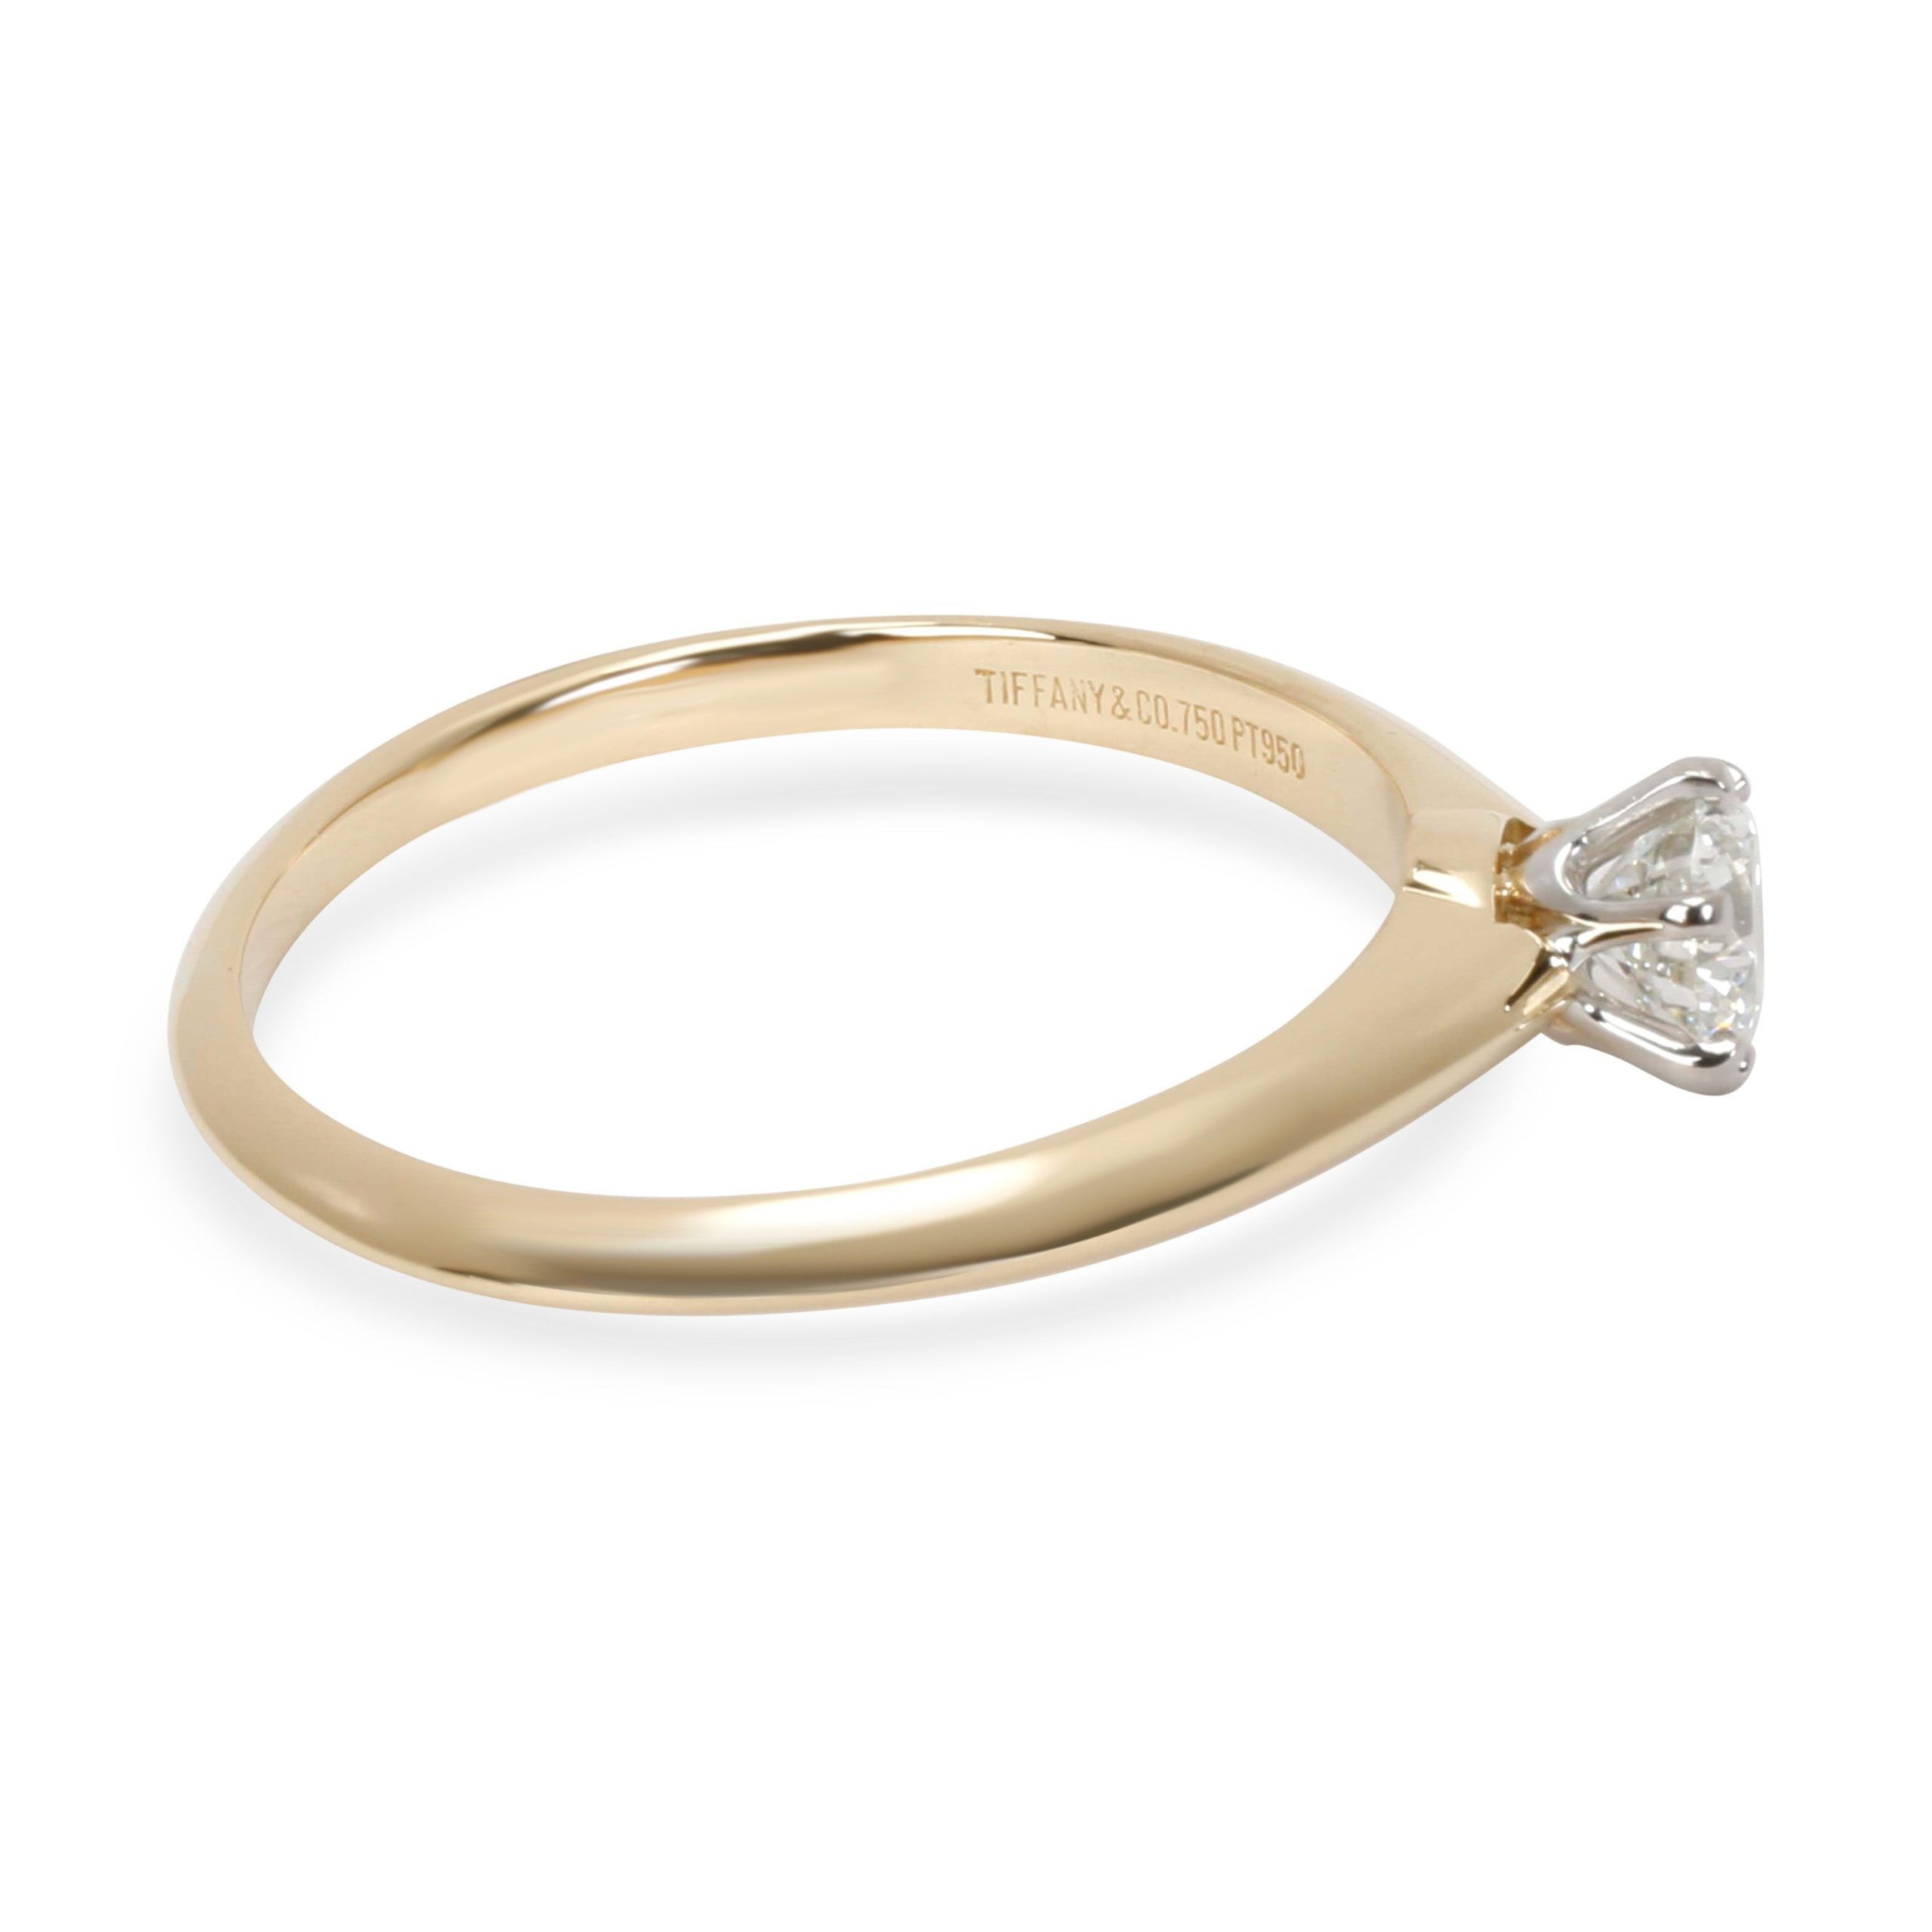 Tiffany & Co. Tiffany & Co. Solitaire Diamond Engagement Ring in 18K Gold I VVS2 0.41CTW Size ONE SIZE - 2 Preview